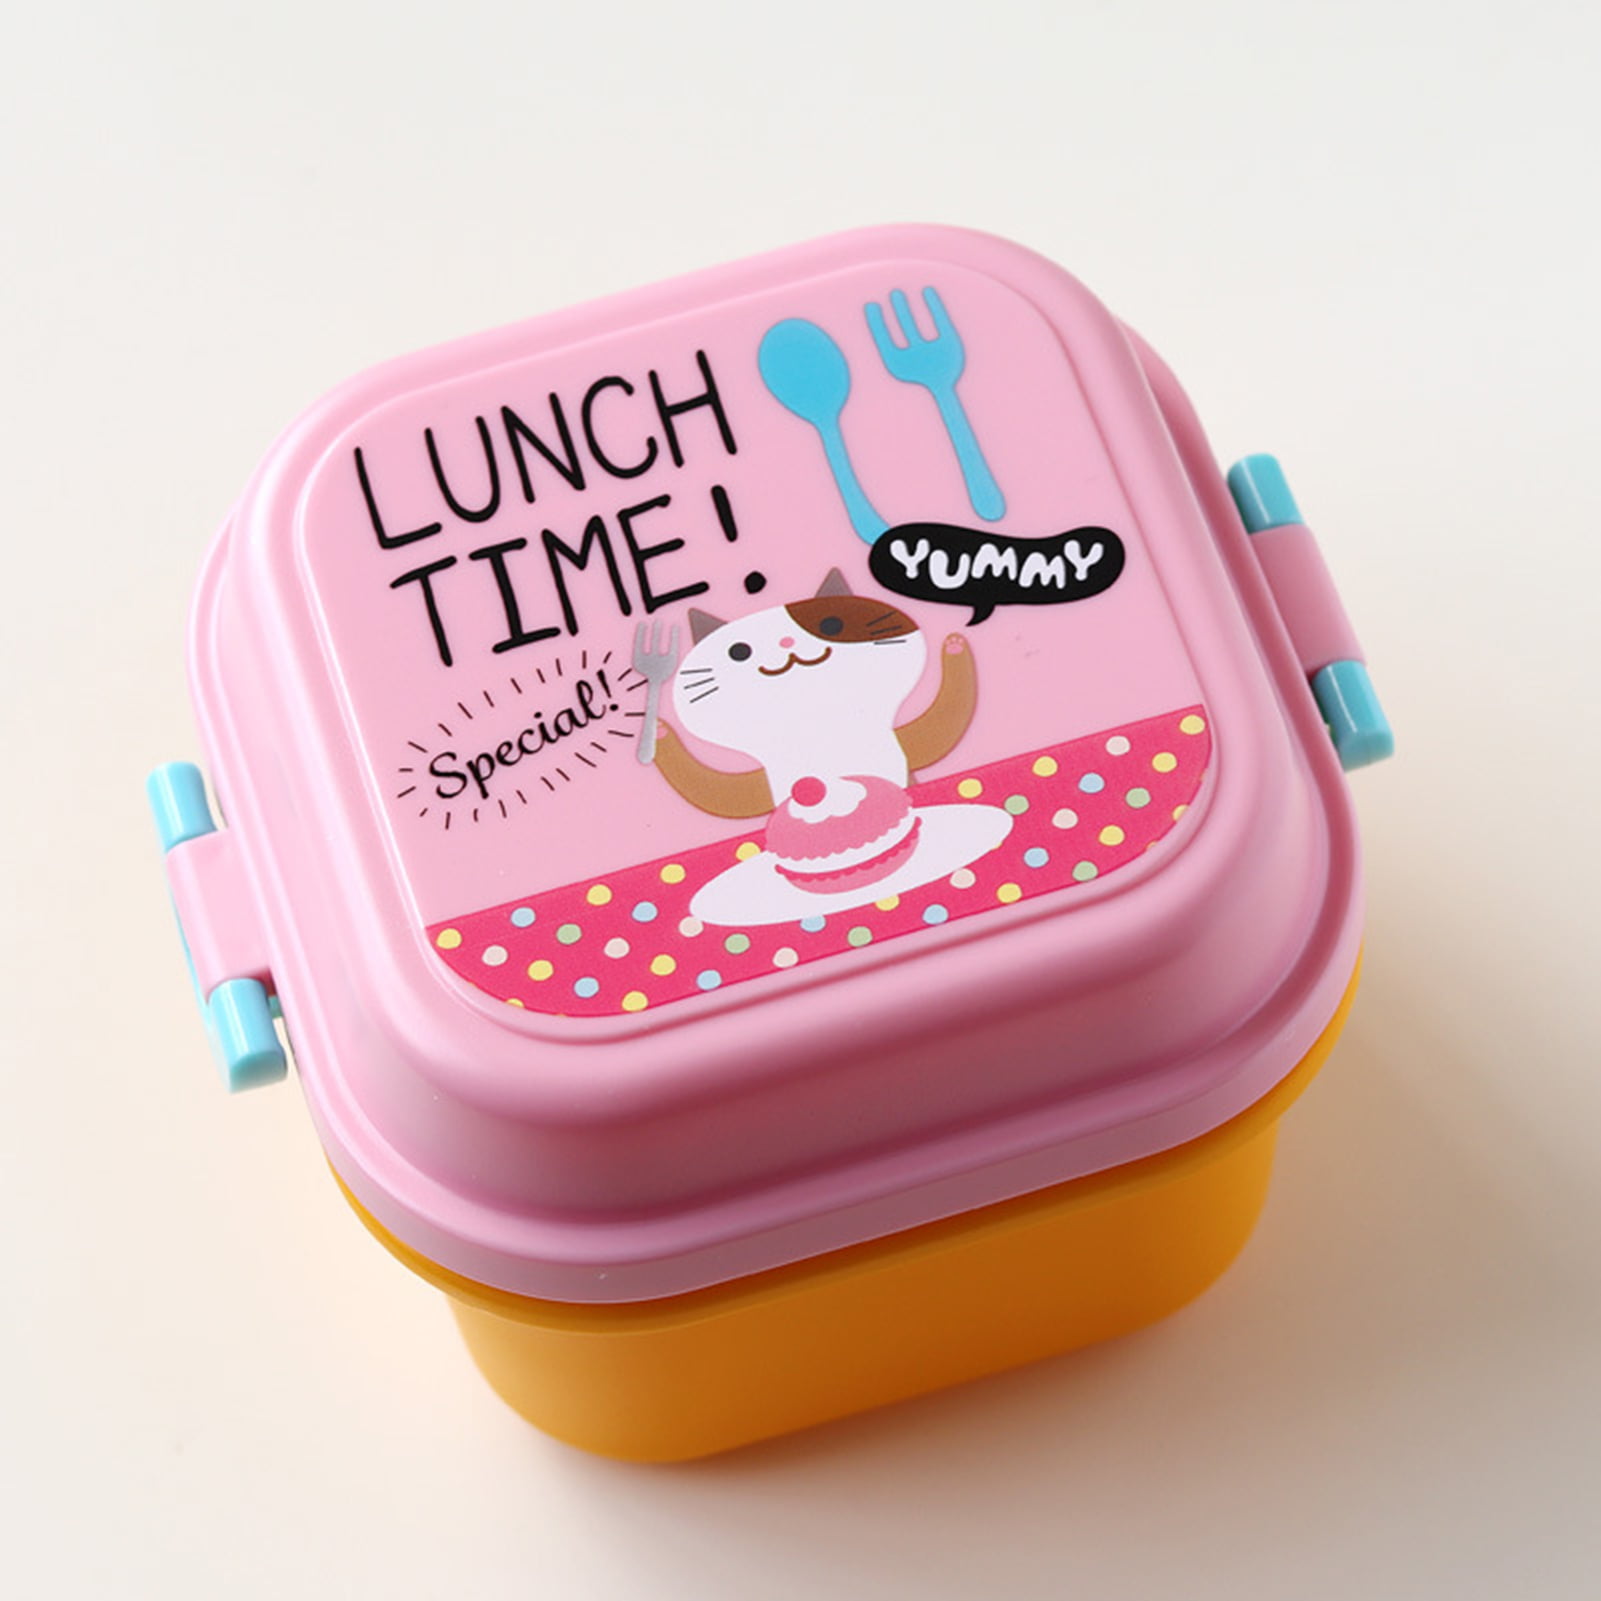 Simple Modern Bento Lunch Box for Kids | BPA Free, Leakproof, Dishwasher  Safe | Lunch Container for …See more Simple Modern Bento Lunch Box for Kids  